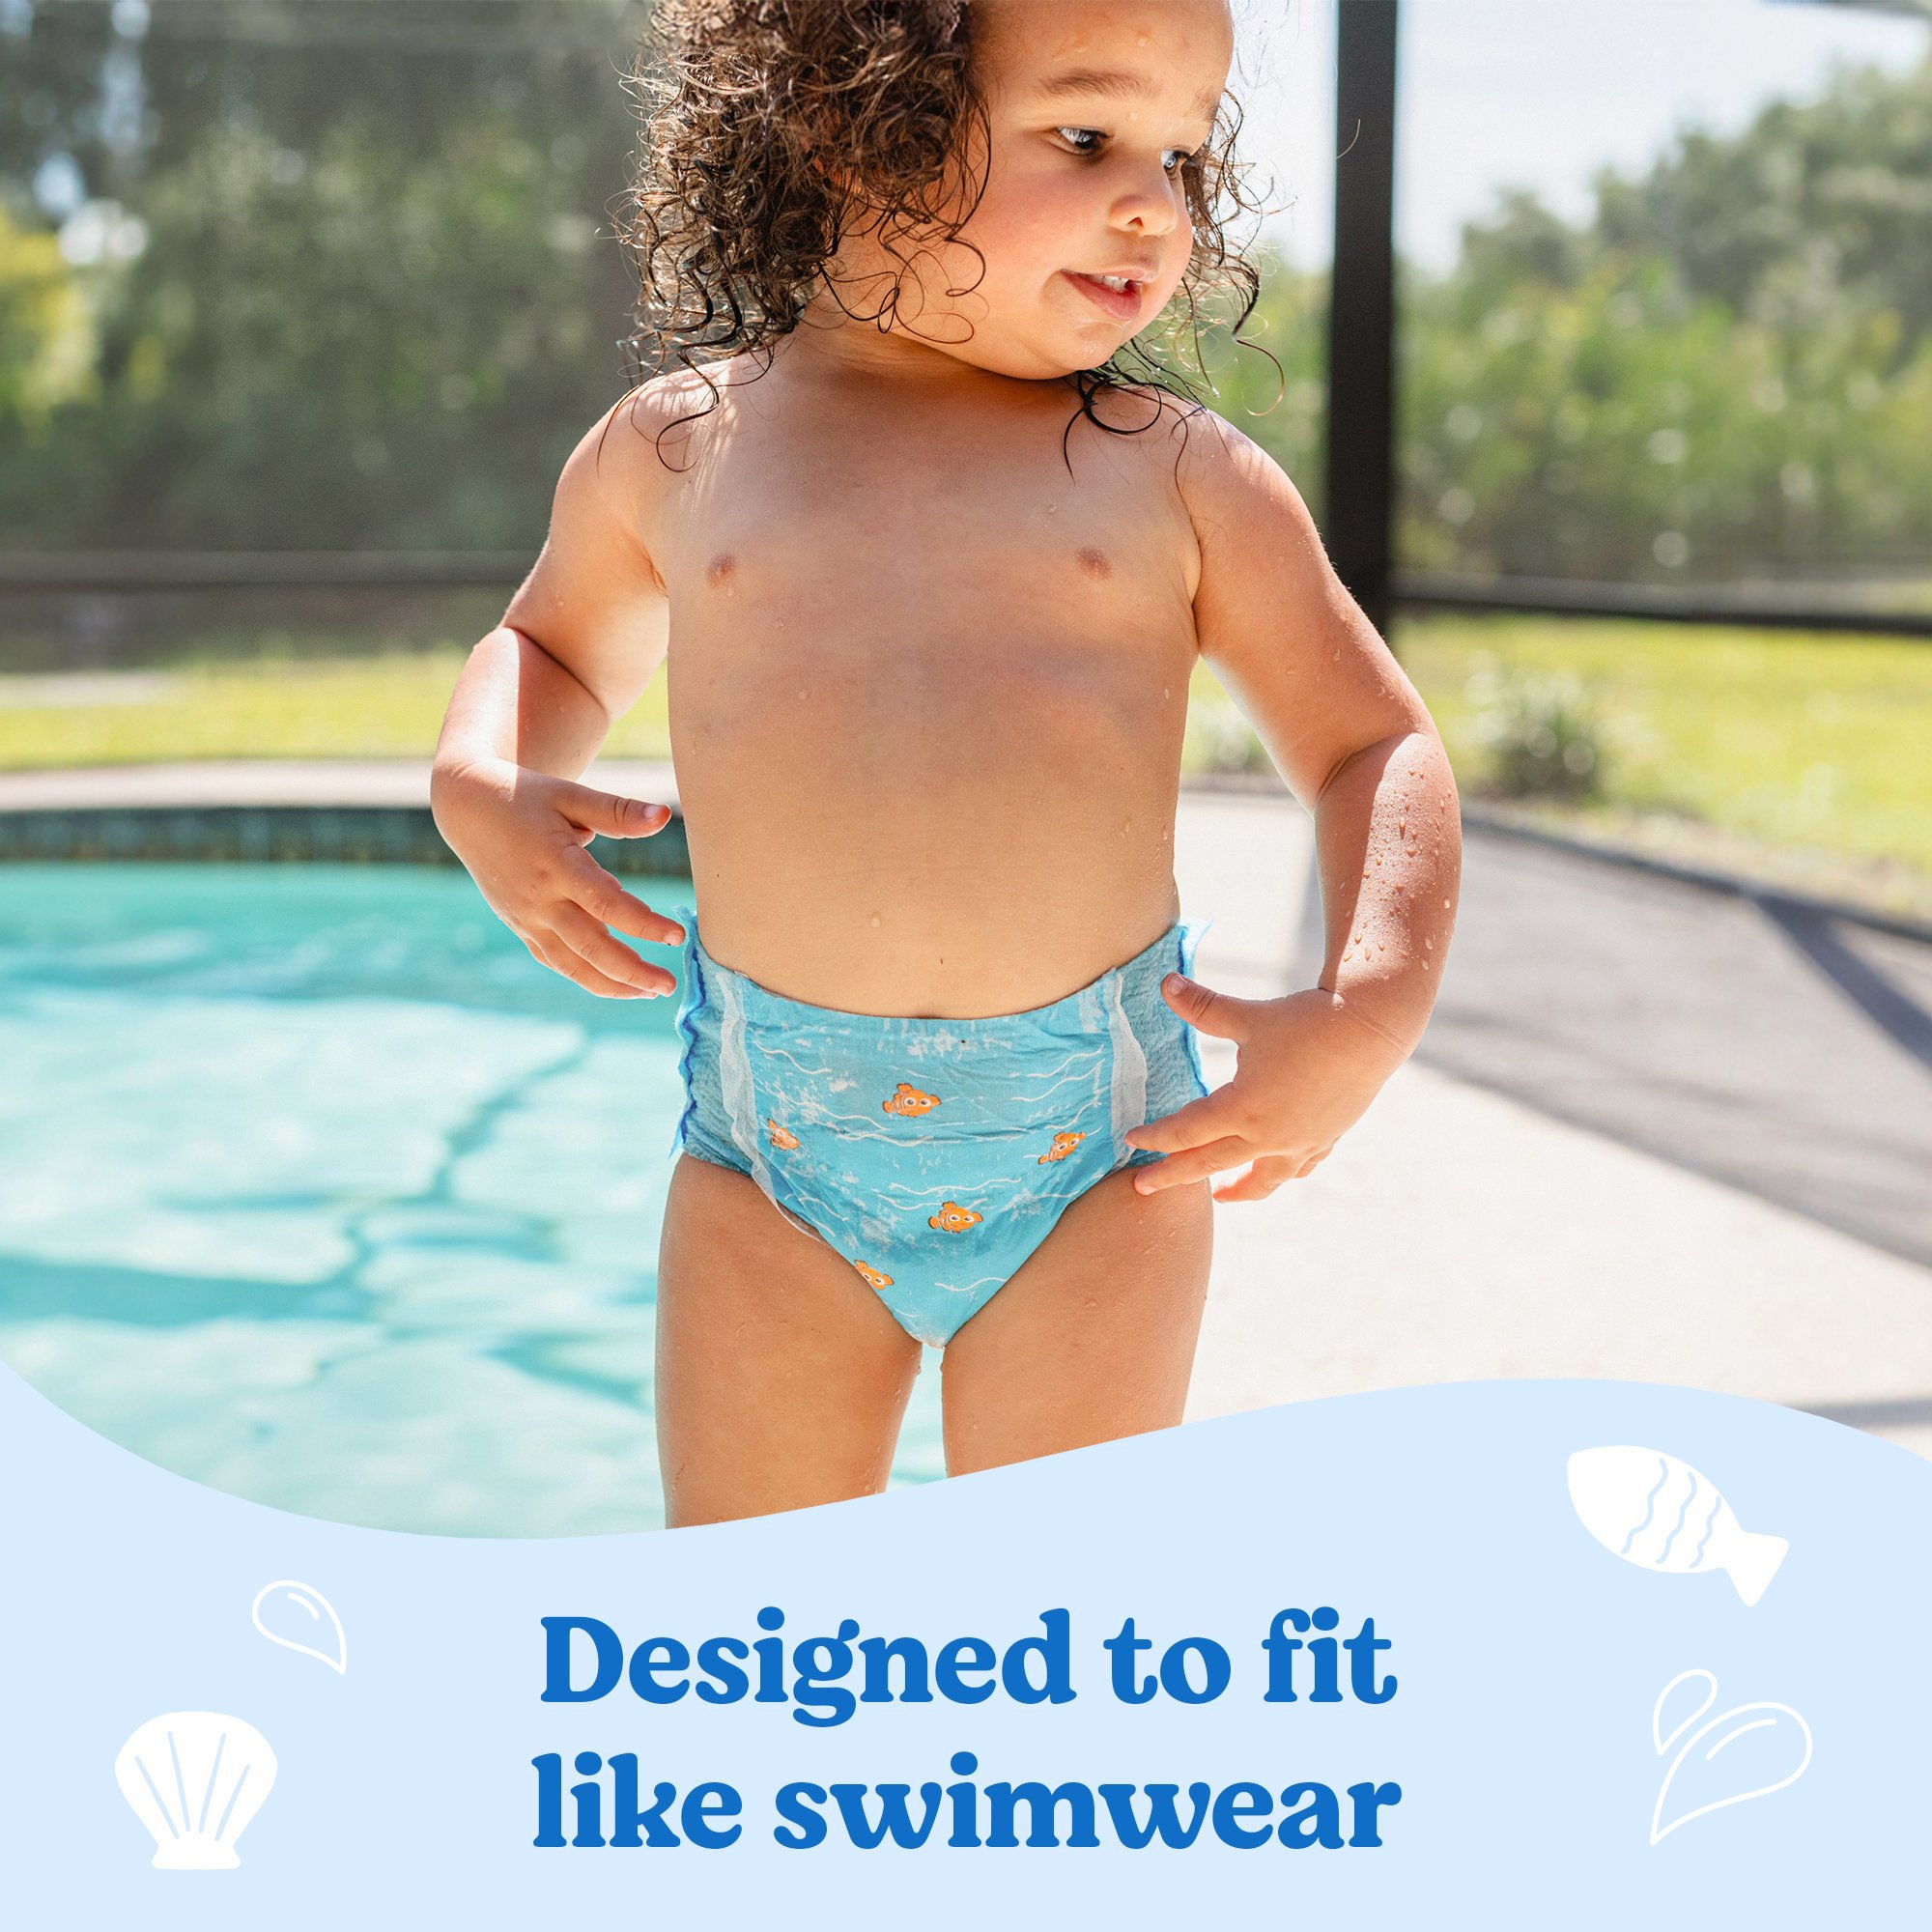 Pampers Splashers Swim Pants - Large - Shop Diapers at H-E-B